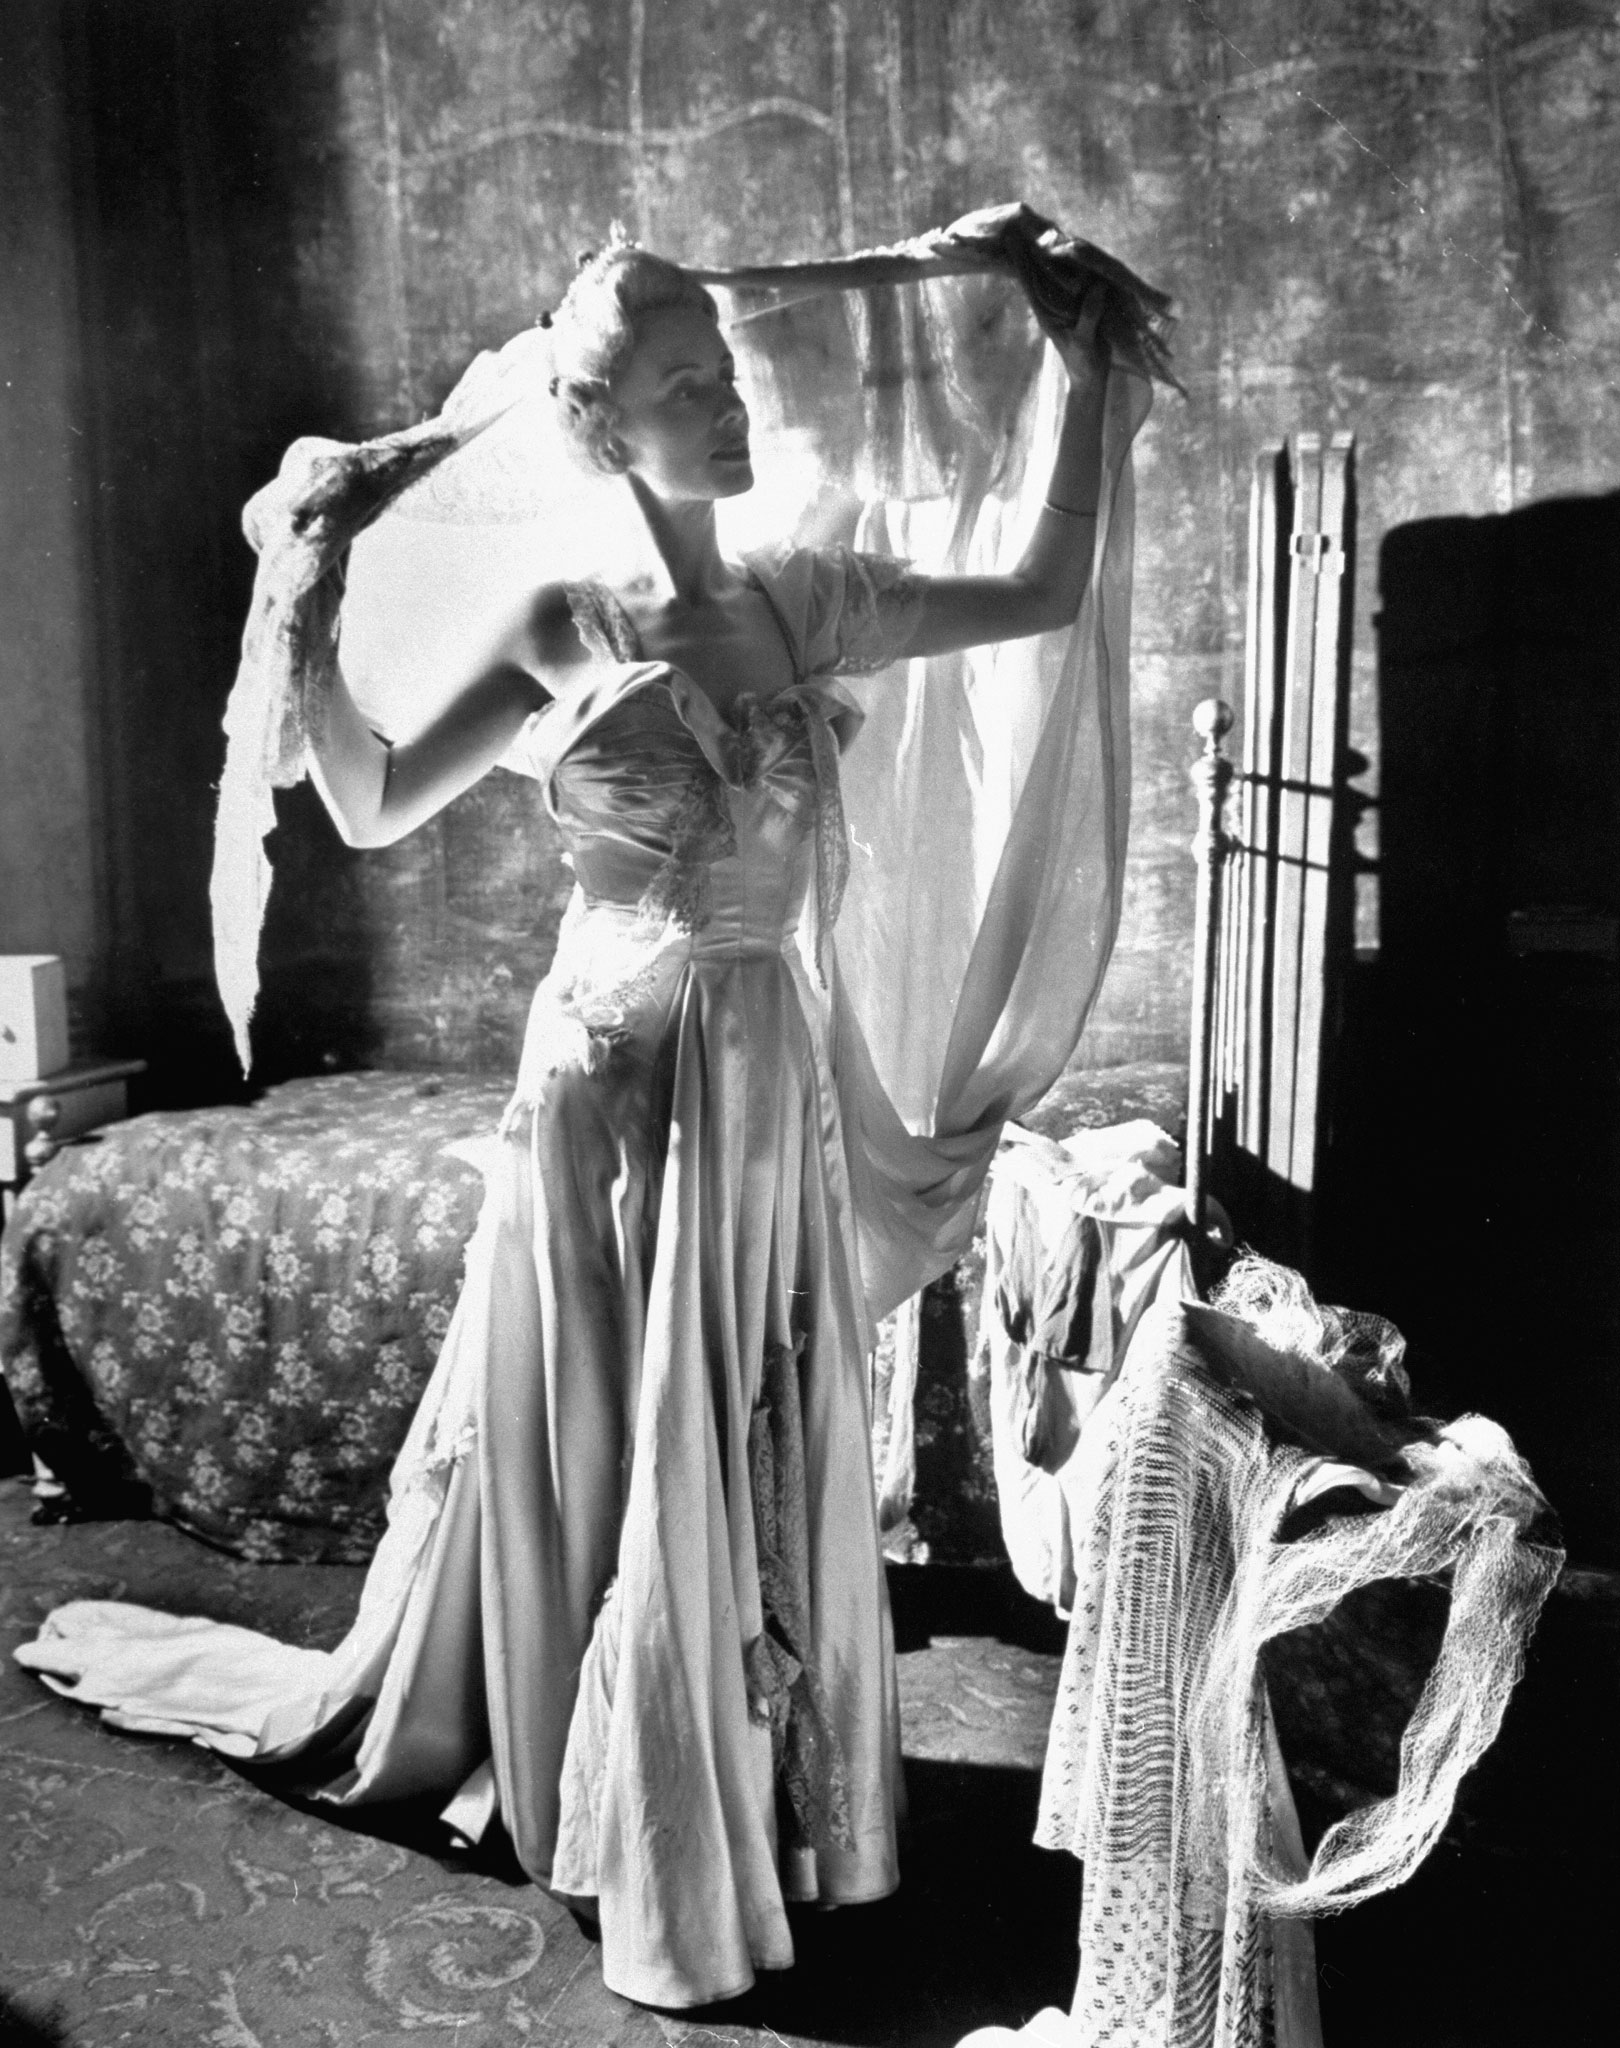 Blanche DuBois, is a Southern girl who lives in a make-believe world of grandeur, preens in faded evening gowns and makes herself out to be sweet, genteel and deliccate. She comes to visit her sister Stella and brother-in-law in the French quarter of New Orleans.